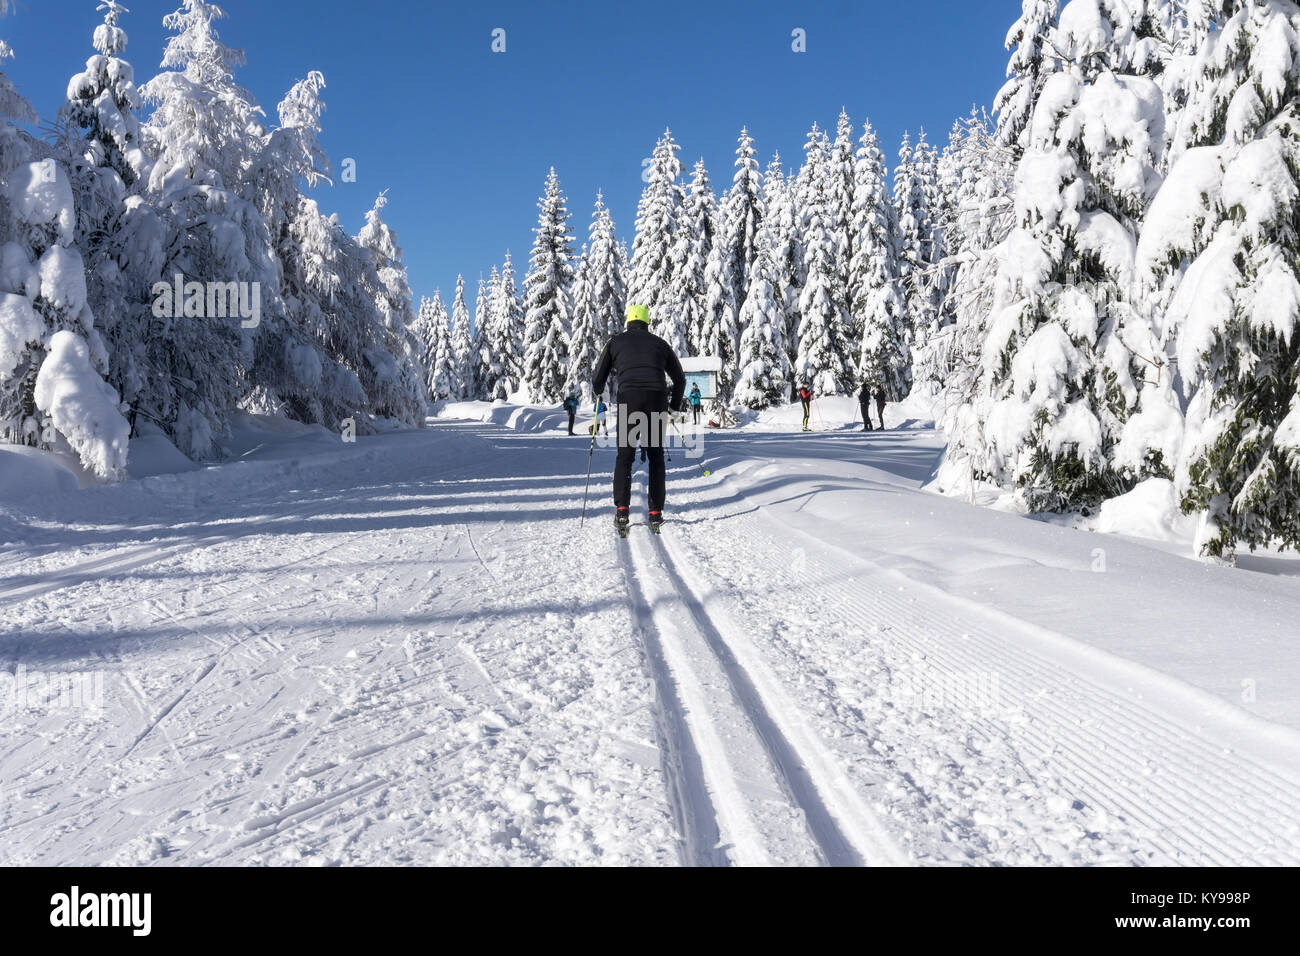 Winter road in mountains. Skier on groomed ski trails for cross-country. Trees covered with fresh snow in sunny day in Karkonosze, Giant Mountains Stock Photo